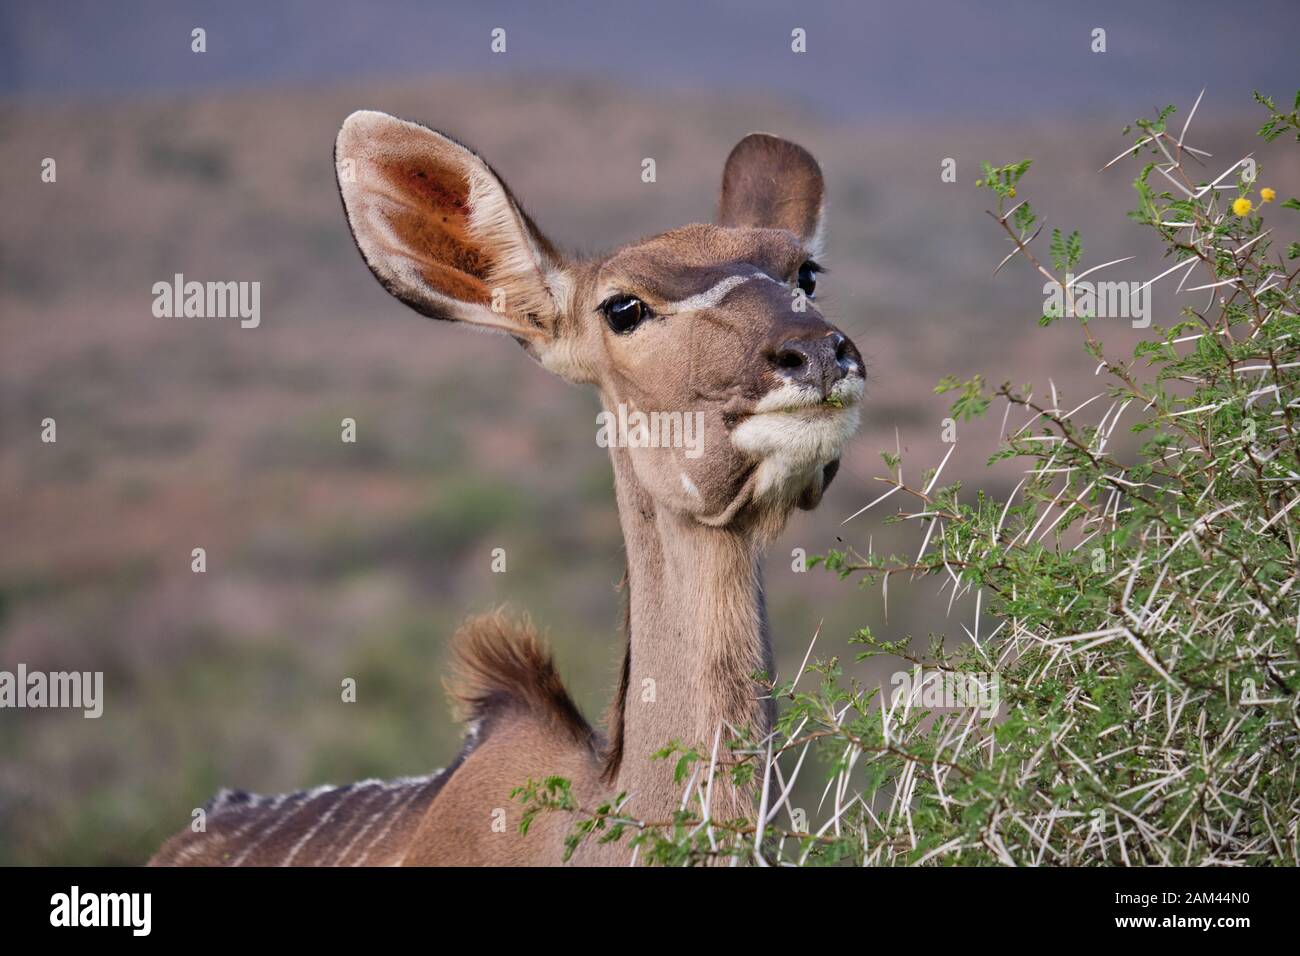 Head shot portrait of a female greater Kudu (Tragelaphus strepsiceros) going to eat the branch of an acacia bush Stock Photo